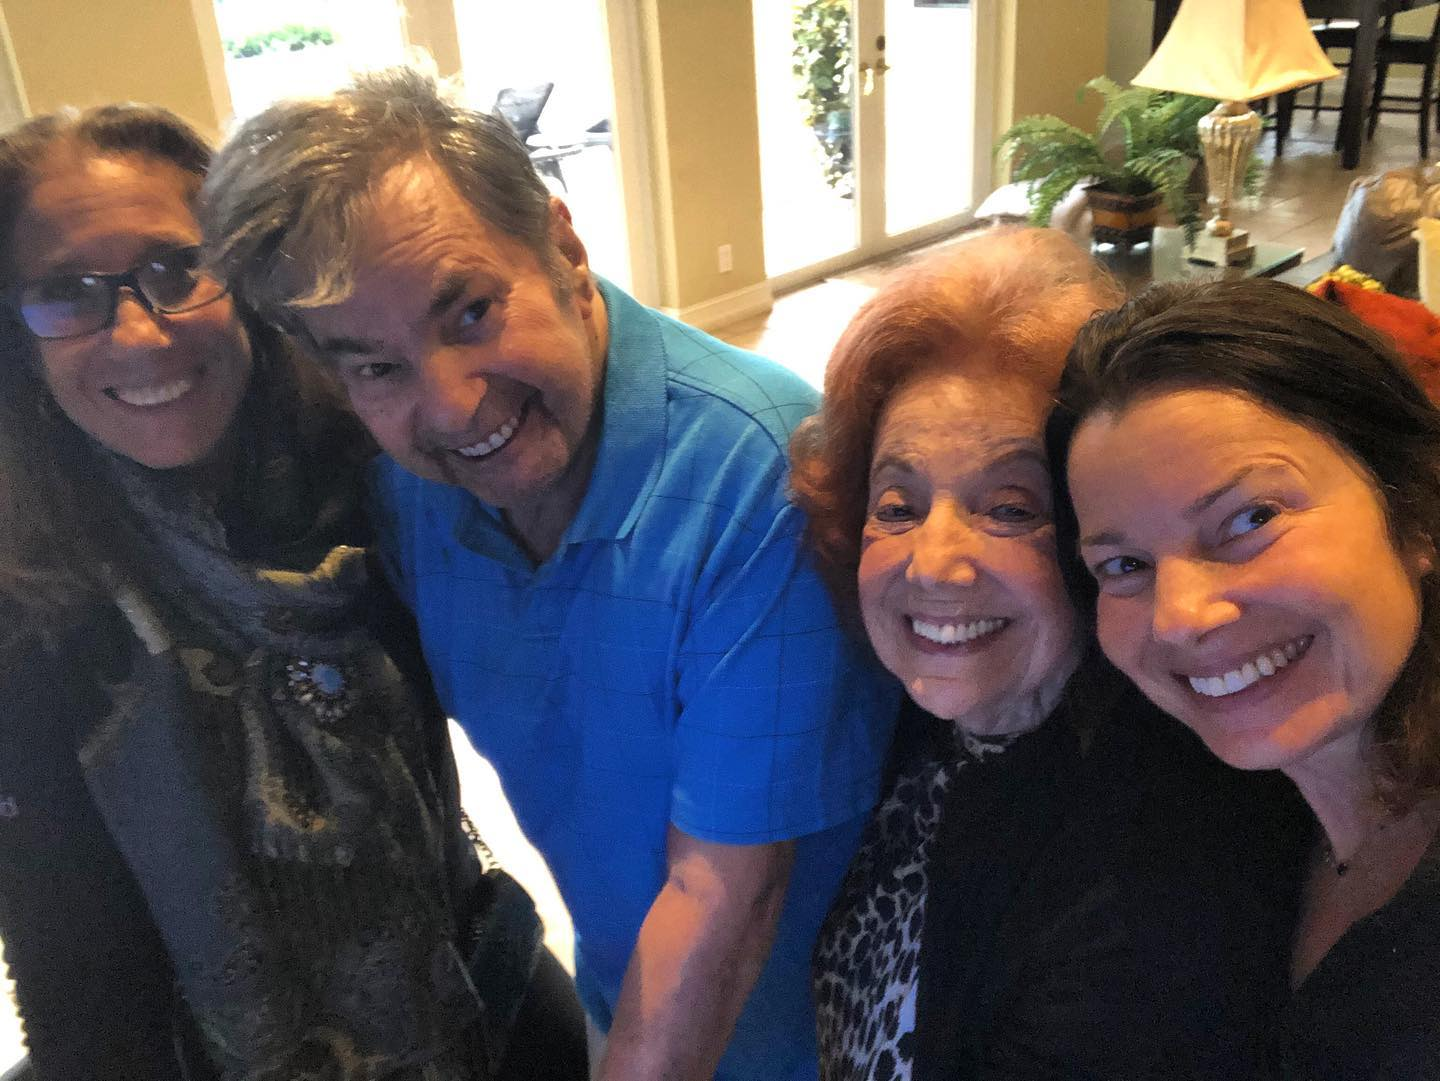 Fran Drescher shared this picture of her family on Facebook in 2020